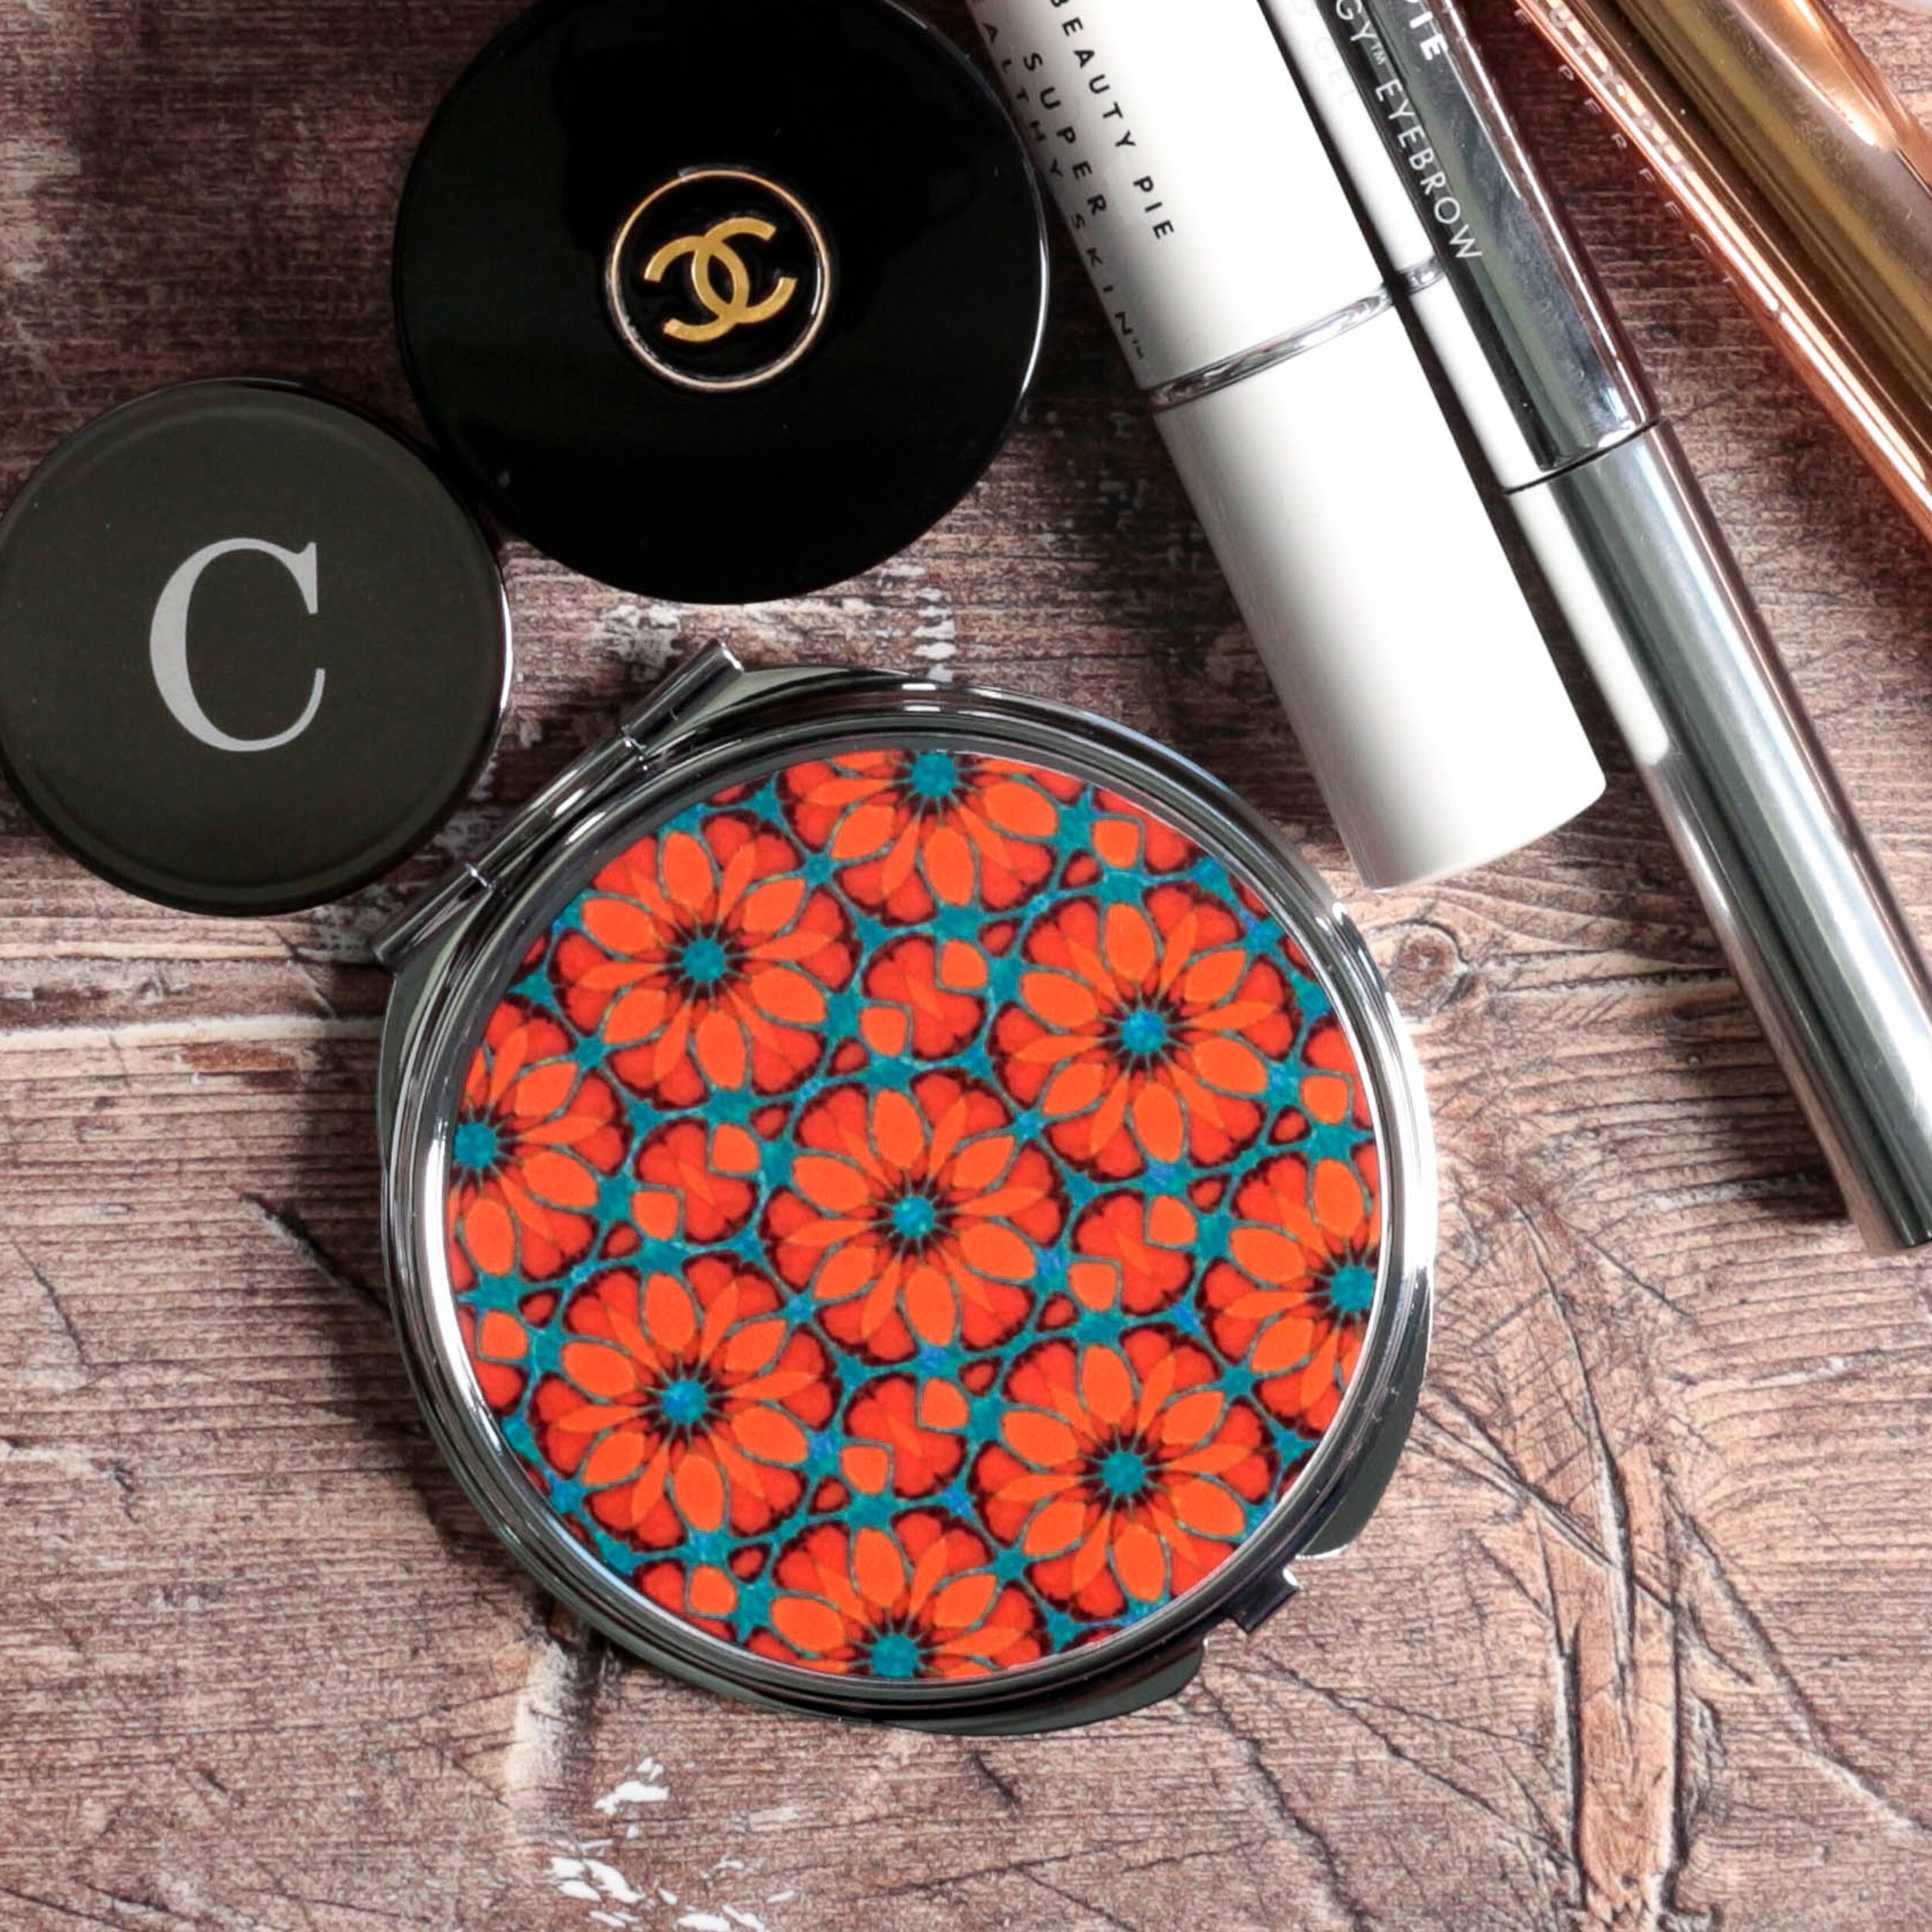 Red Poppies Compact Mirror - Small Makeup Portable Vanity Folding Hand Gift For Gardener Flower